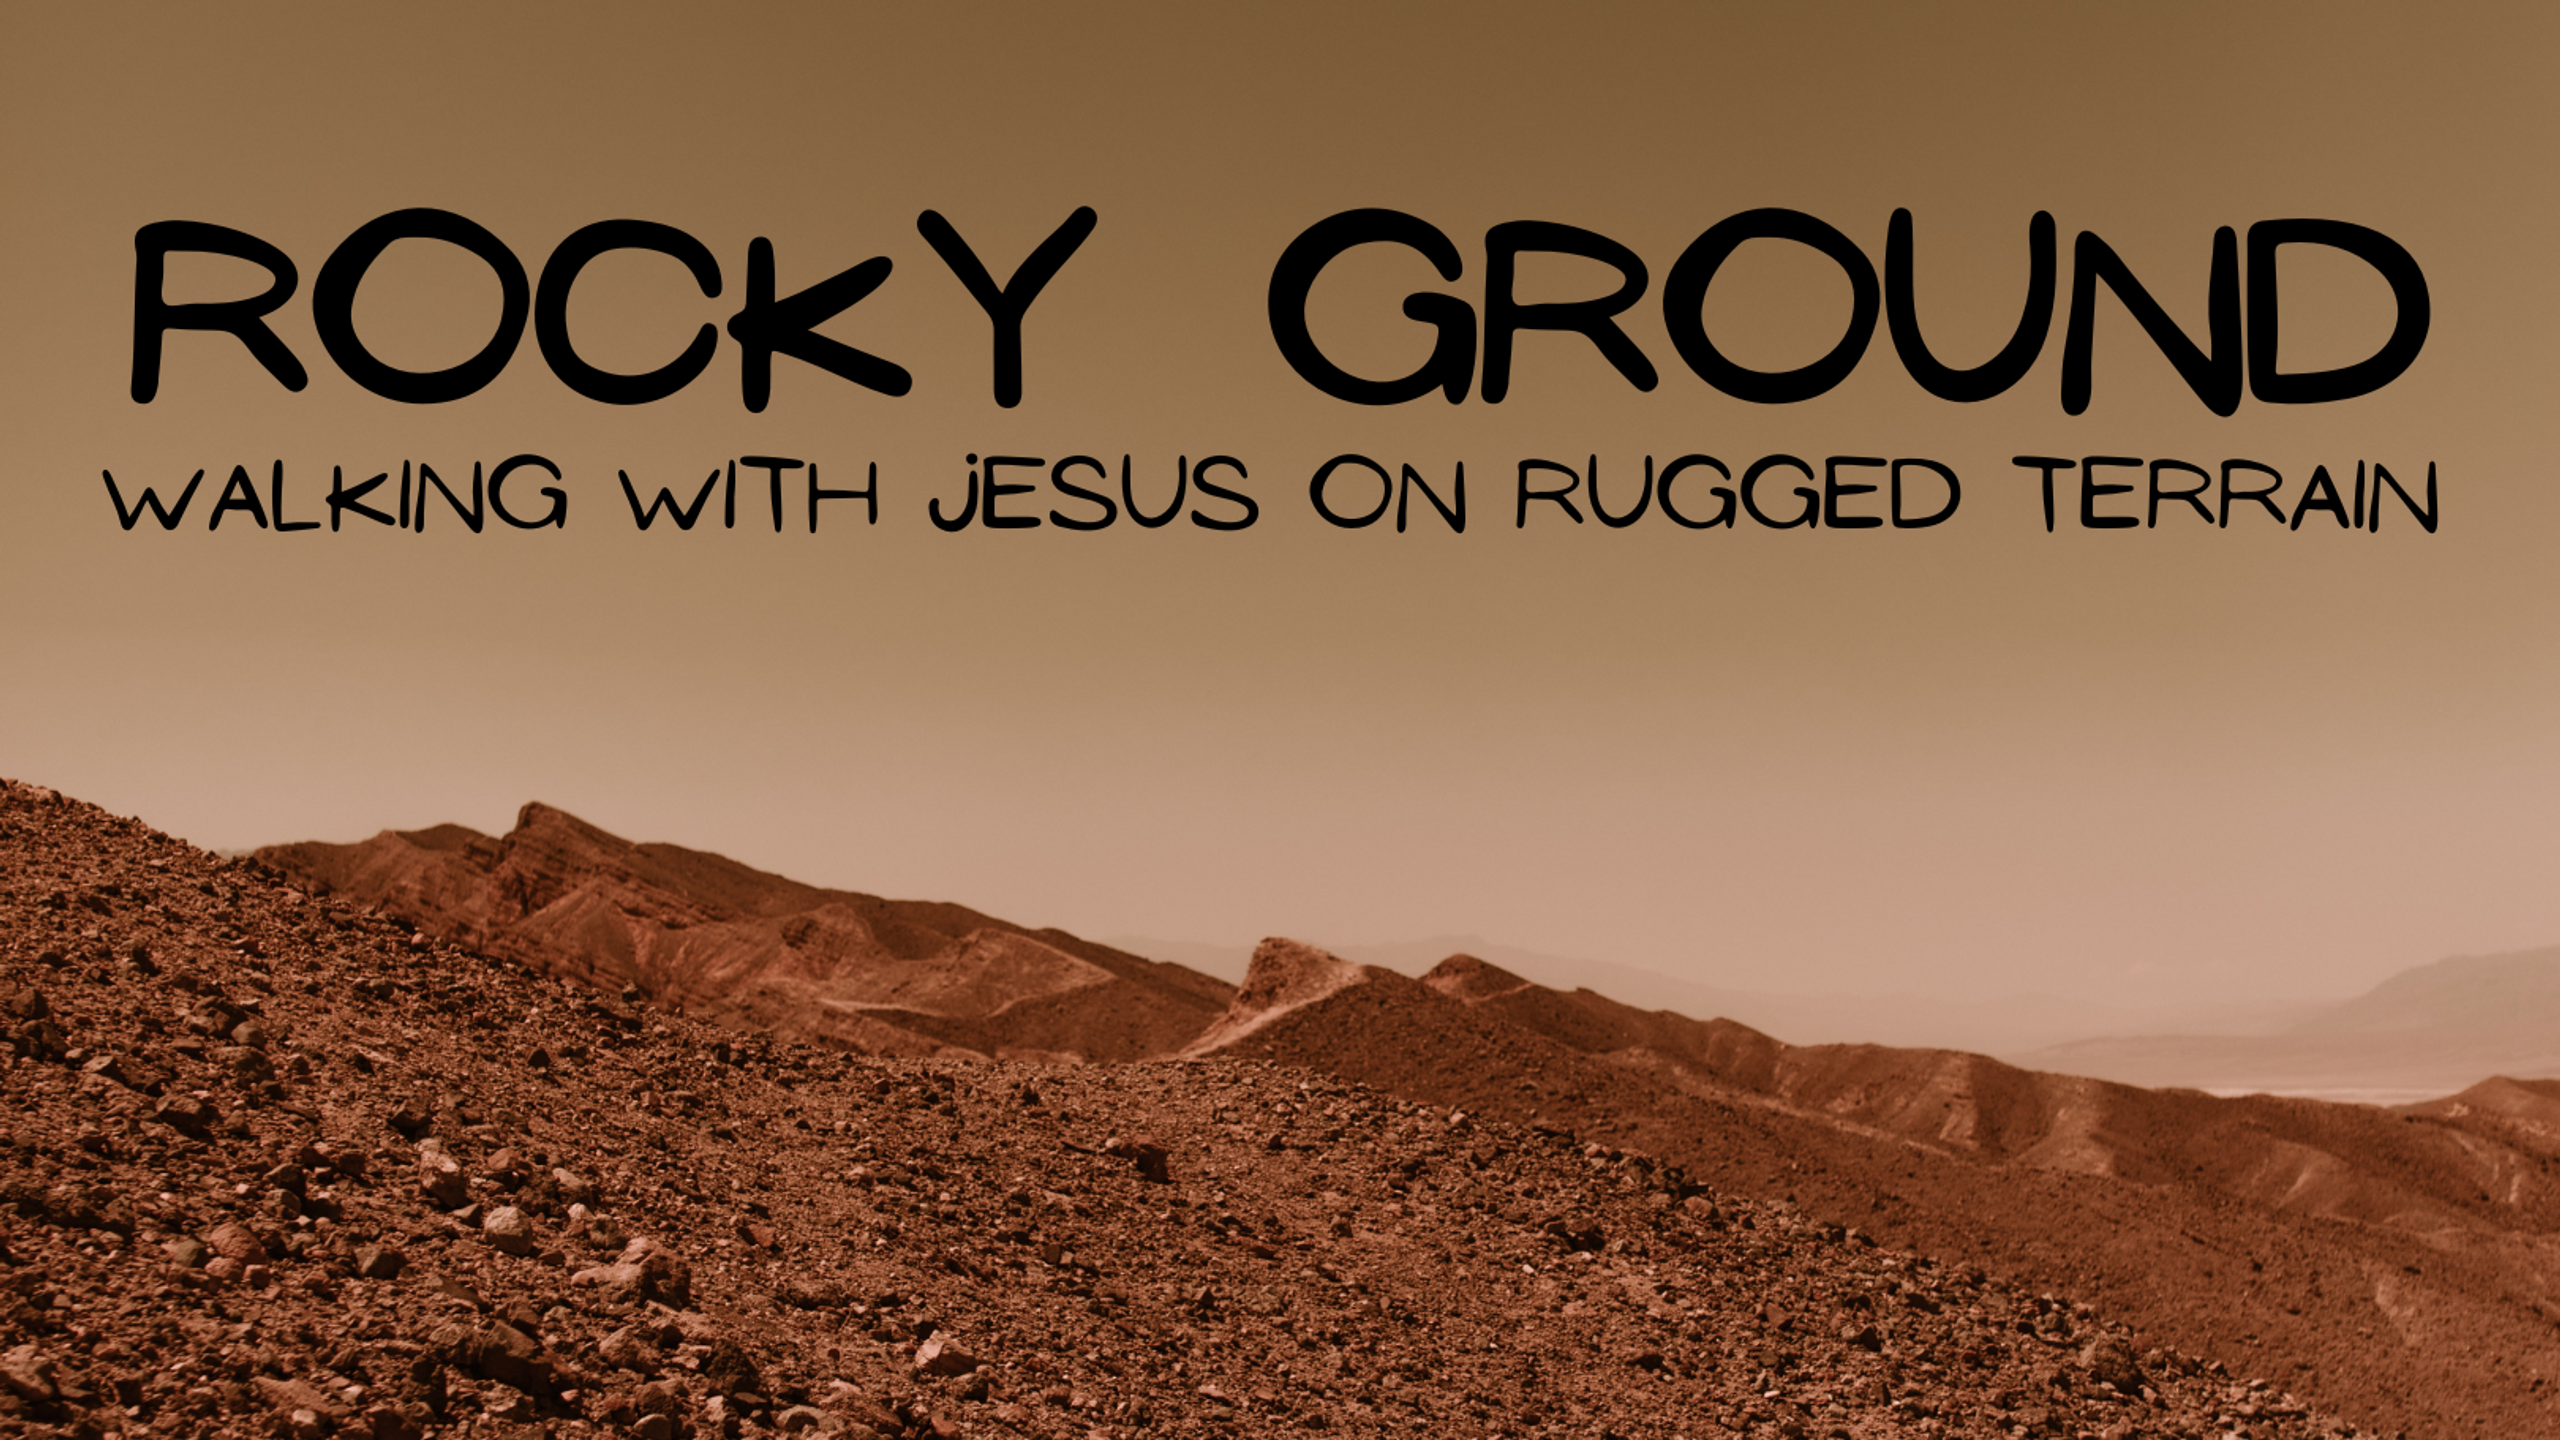 Rocky Ground: Walking with Jesus on Rugged Terrain